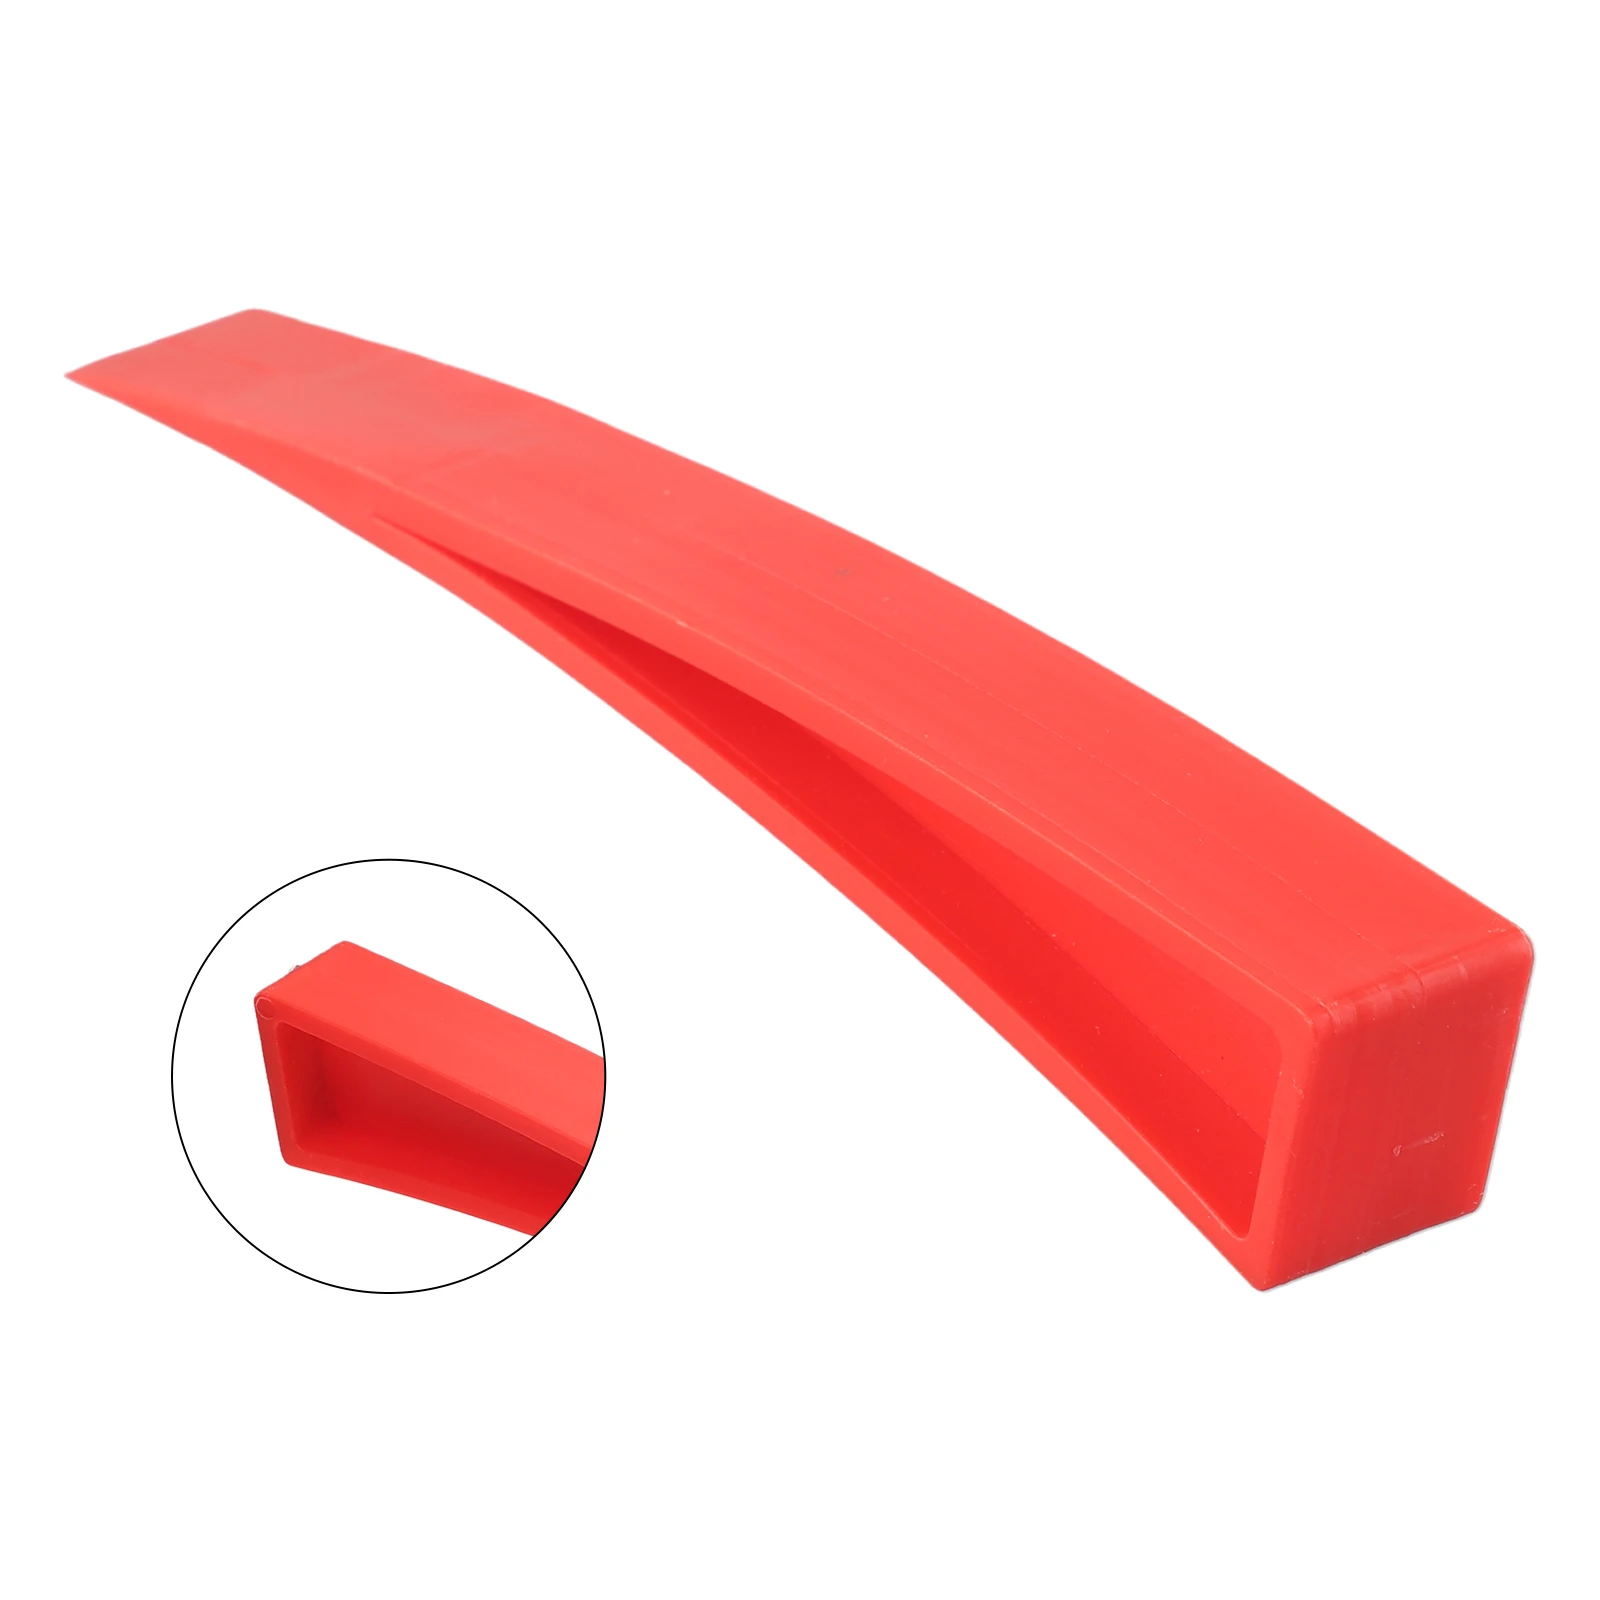 Red Auto/Car Door For Window Wedge Panel Paintless Dent Removal Repair Hand Tool Plastic-Accessories For Vehicles klom pump wedge locksmith hand tools pick set open car door auto air wedge airbag window repair supplies hardware